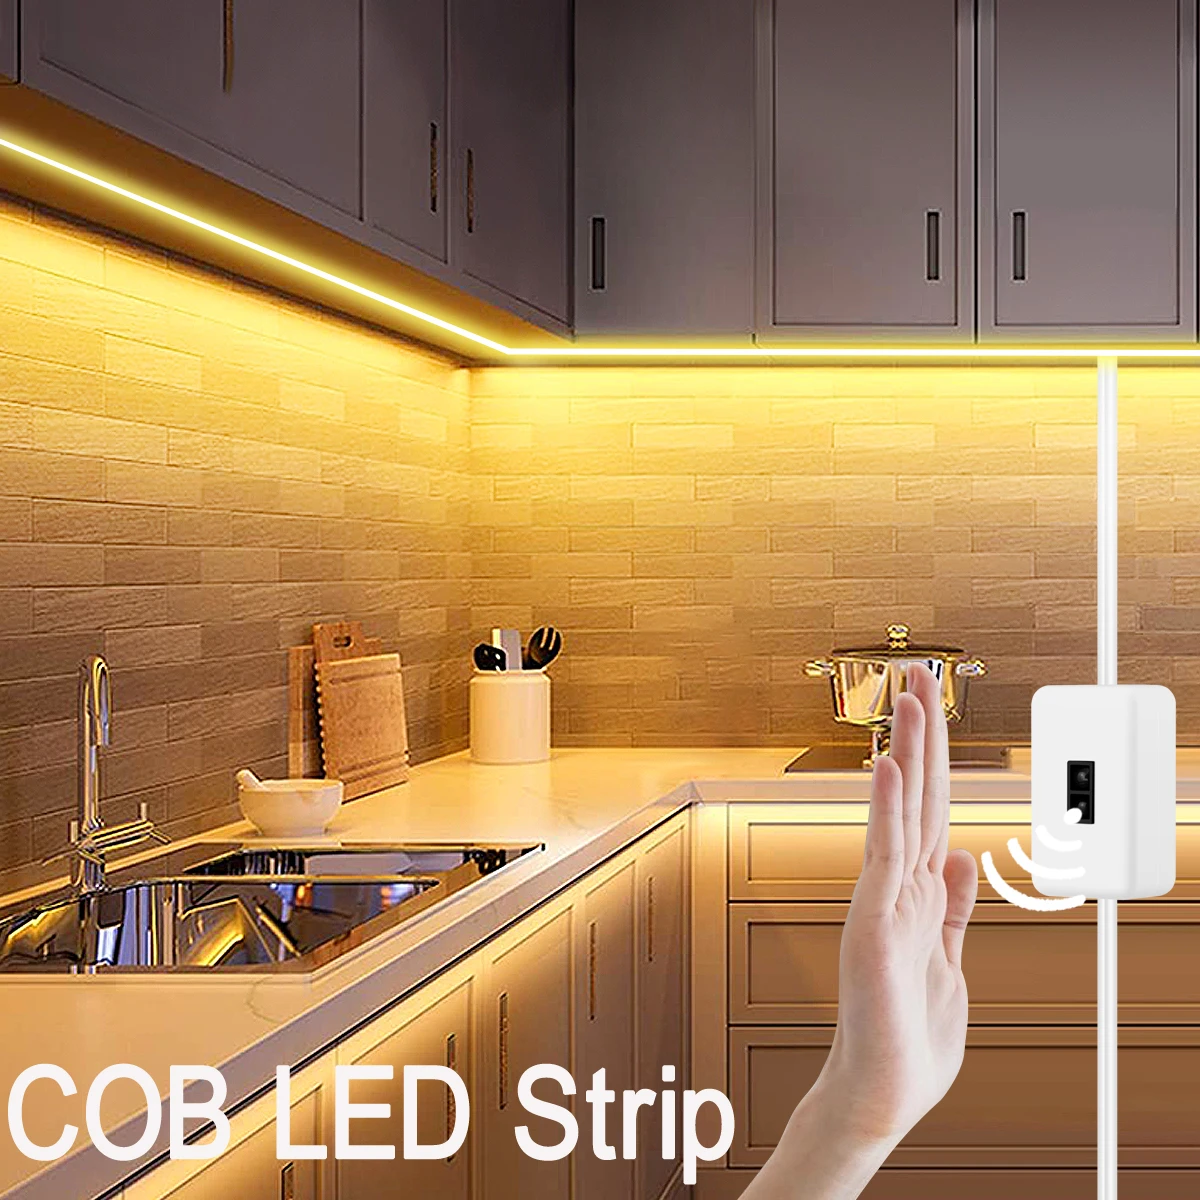 5v USB Led Strip Lights for Room Bedroom Kitchen Decor Hand Sweep Motion  Sensor Control，tv Led Wall Tape Touch Switch Neon Light|LED Strips| -  AliExpress